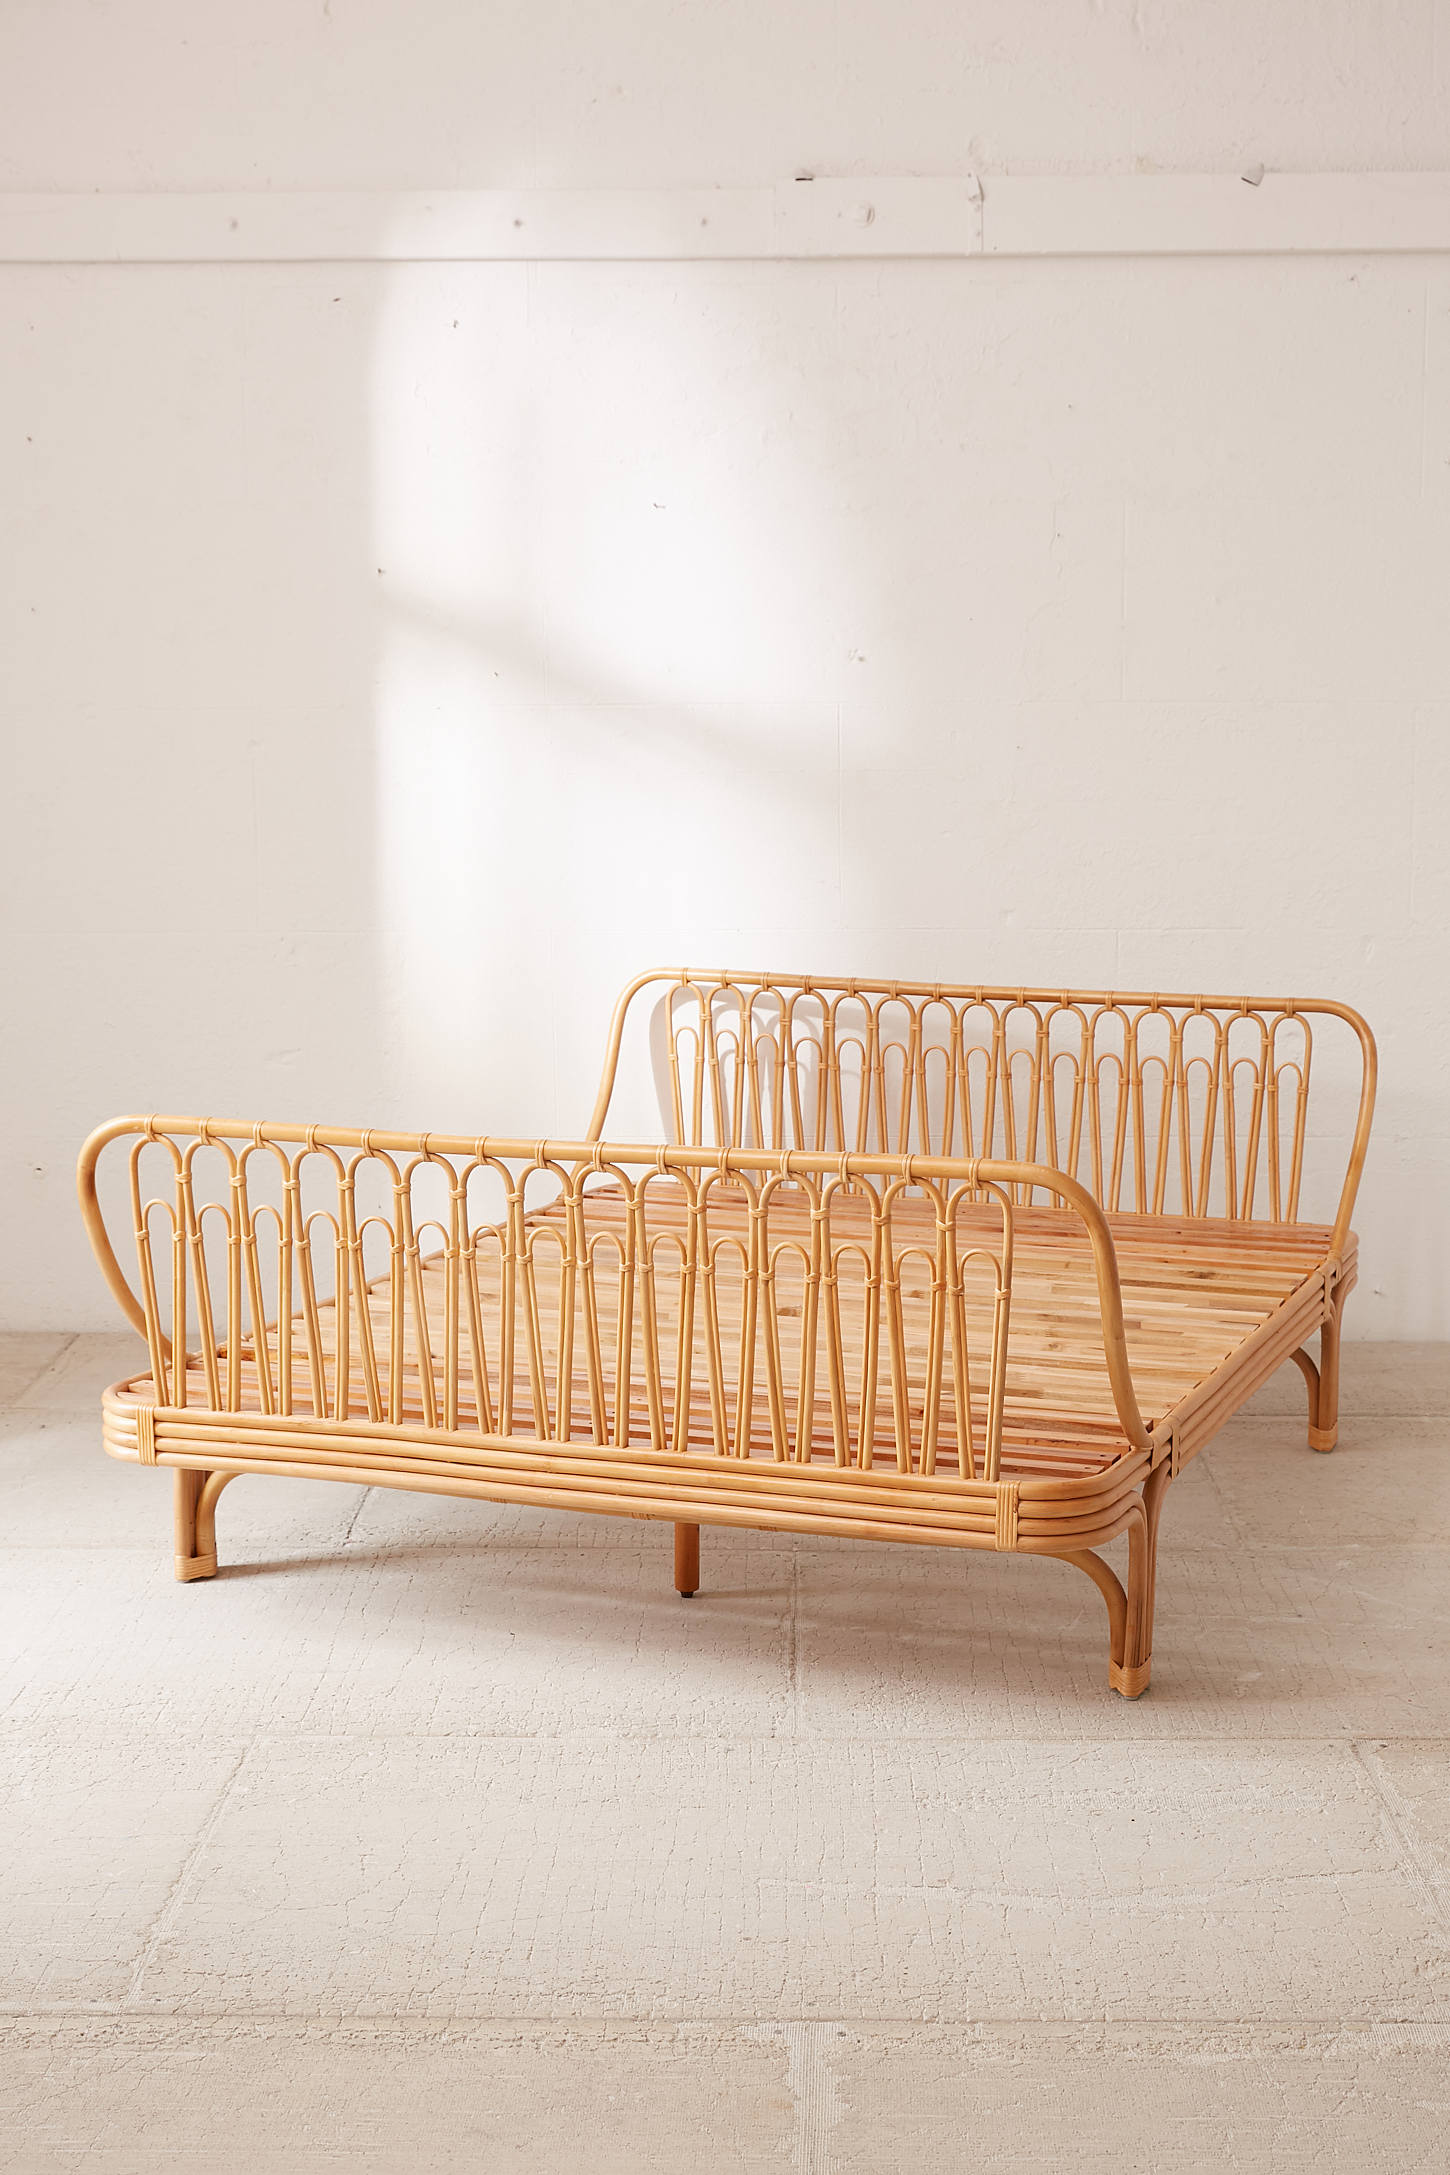 queen-rattan-bed-frame-bamboo